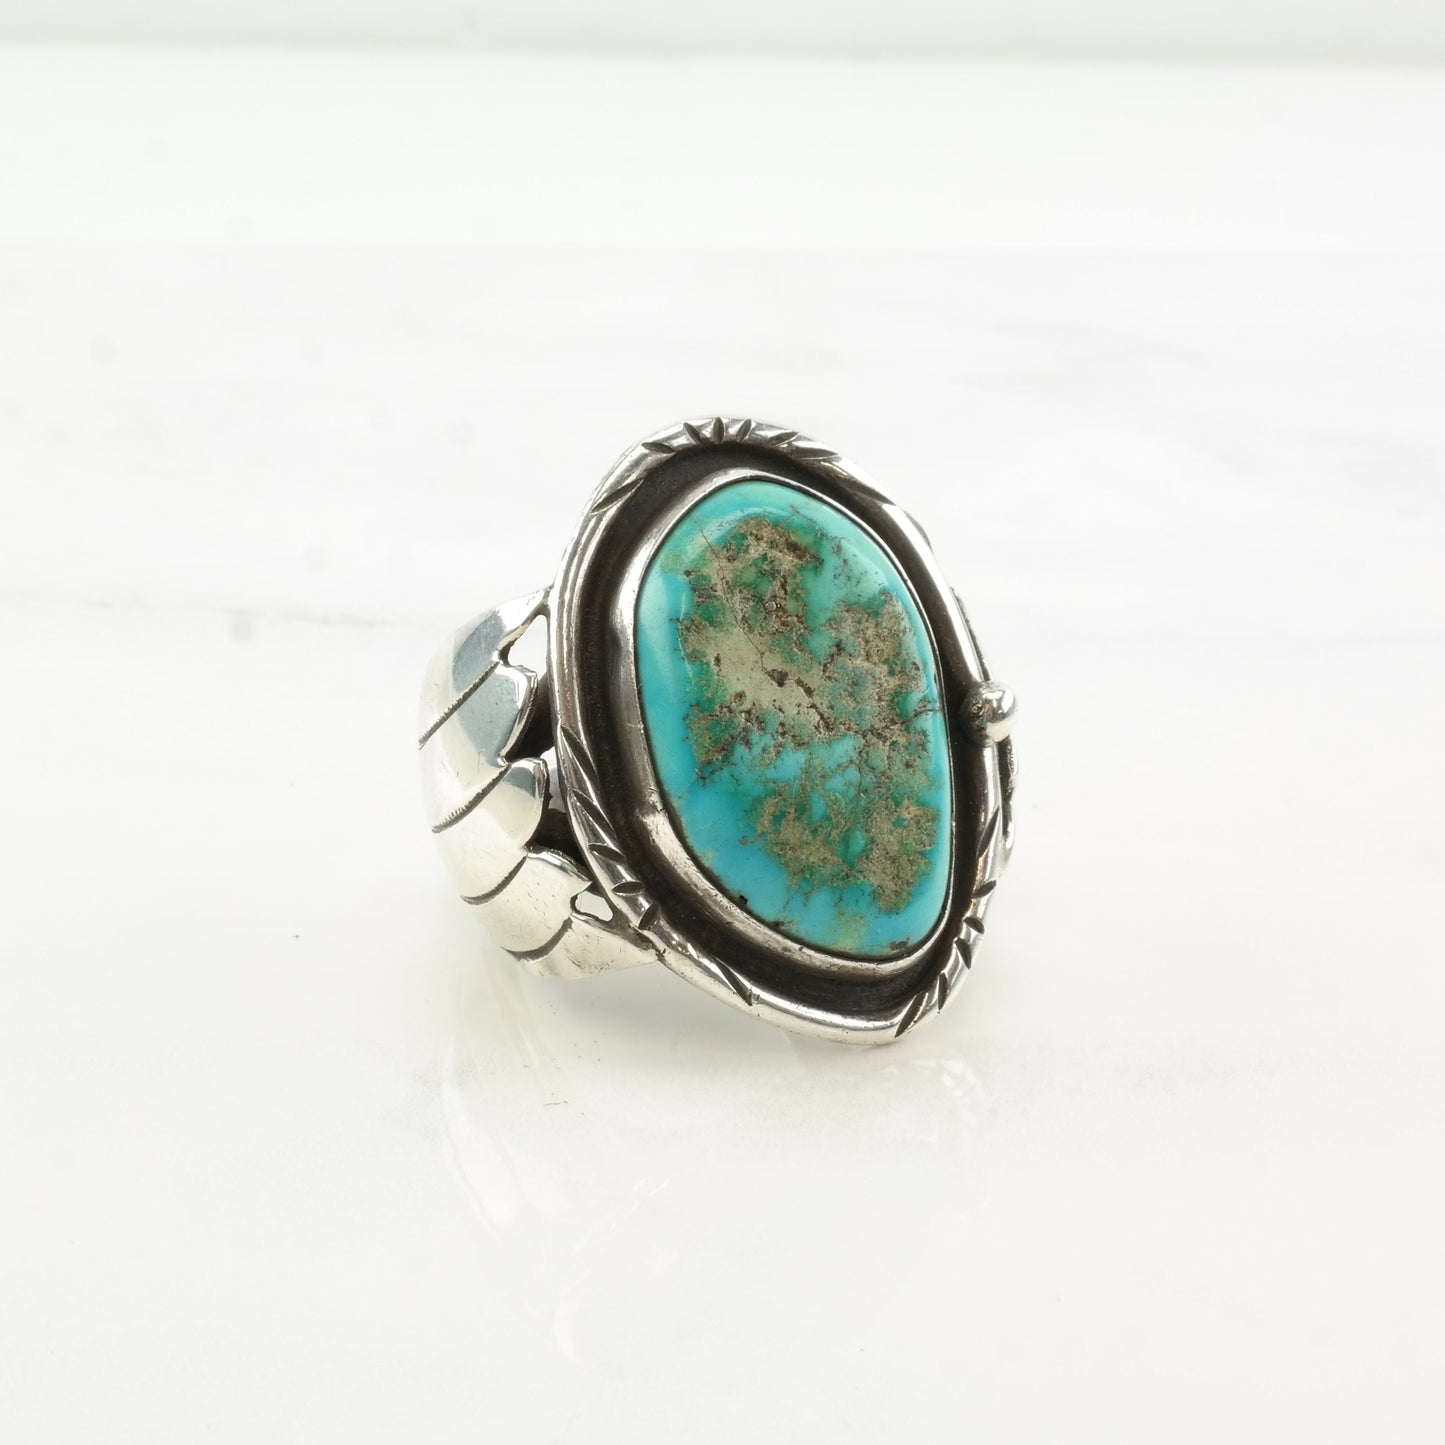 Vintage Southwest Silver Ring Turquoise Feather Shadowbox Sterling Size 12 1/2